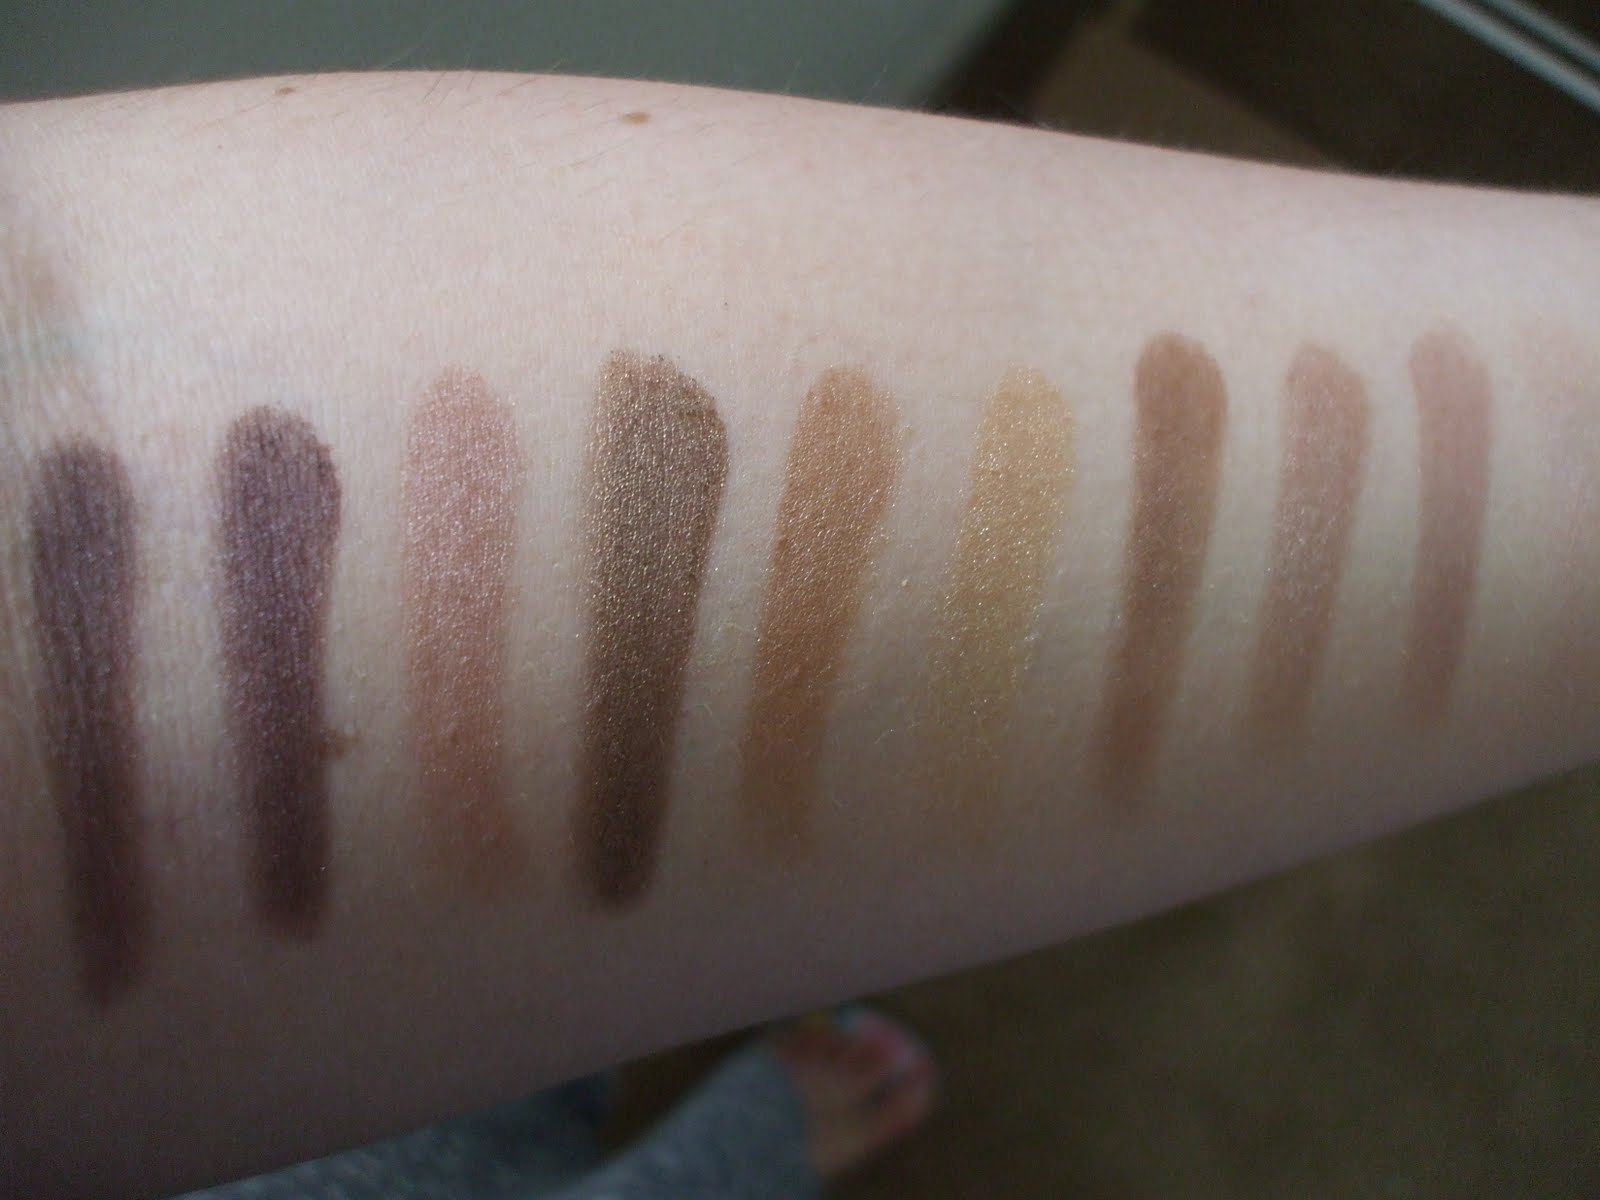 Forever 21 Love & Beauty 10 Natural Eyeshadow Palette - Naked Dupe?